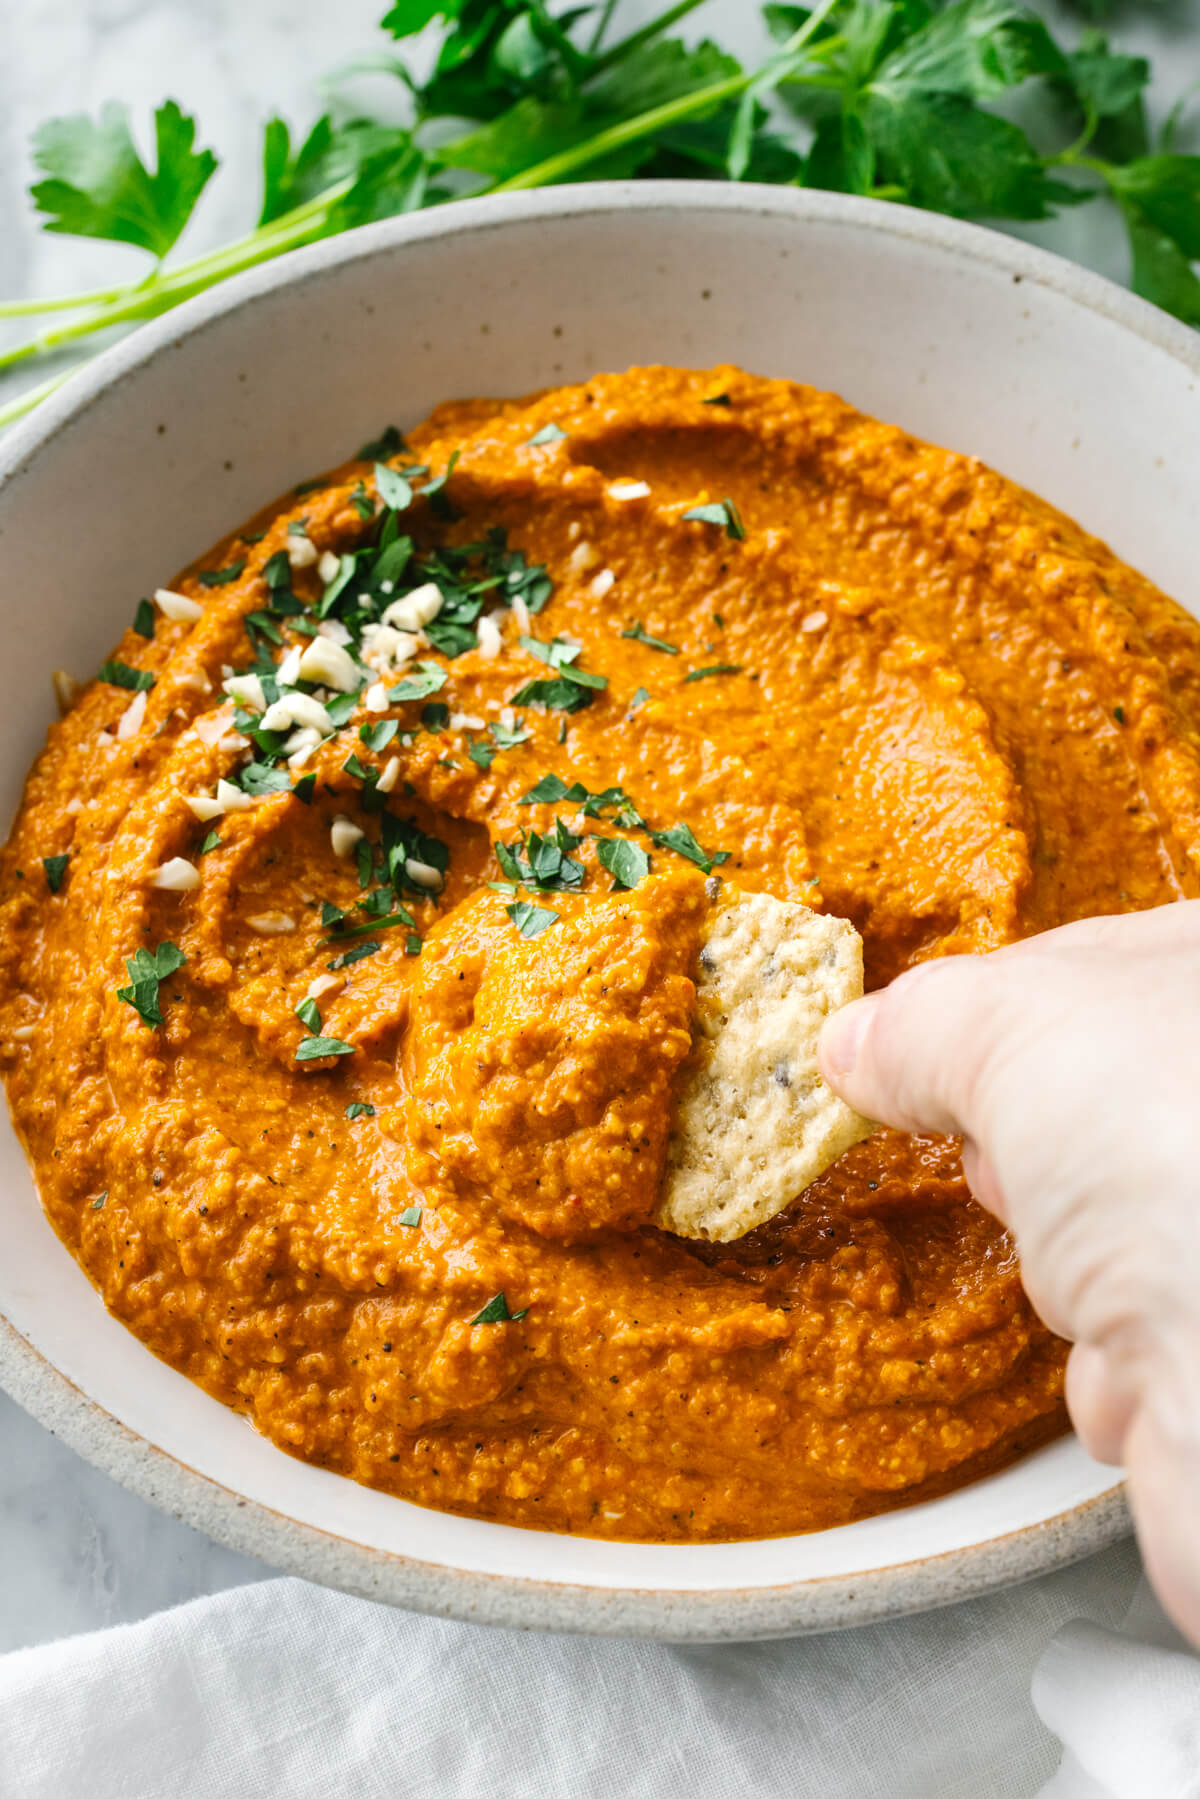 Dipping into a bowl of romesco sauce with a cracker